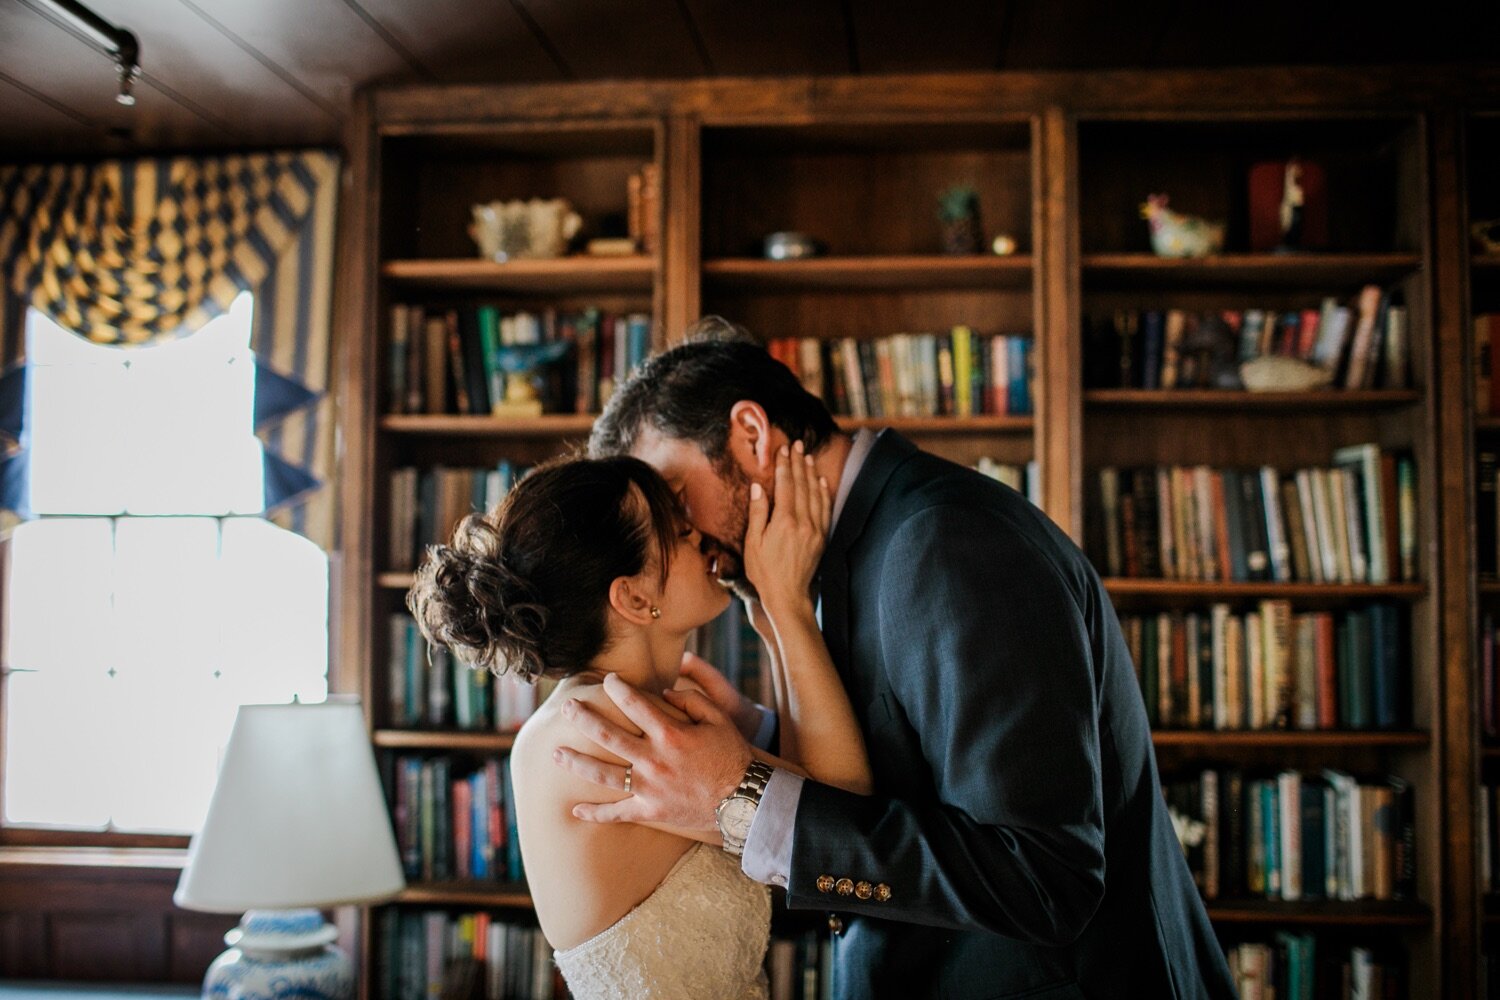 10_Intimate elopement ceremony at the Beekman Arms in Rhinebeck NY.jpg